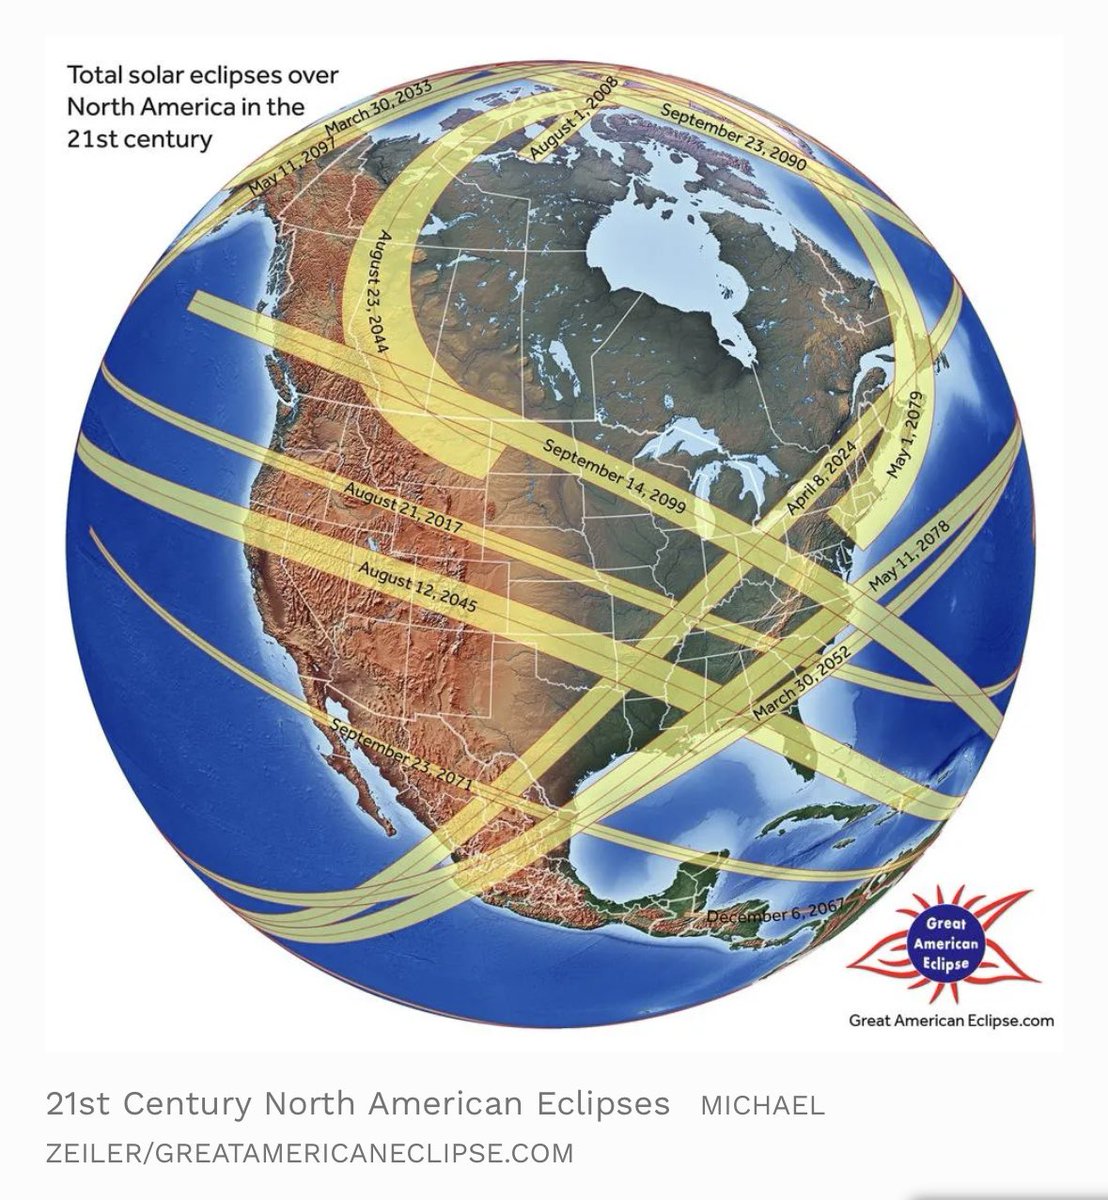 The eclipse cycle is 18 years, 11 days. So, the same eclipse this Monday last occurred in 2006, though offset around 1/3 of the globe’s circumference. (This is per experts I know, so I hope I got it right). How to view with maximal safety *and* awe: insidemedicine.substack.com/p/how-to-view-…